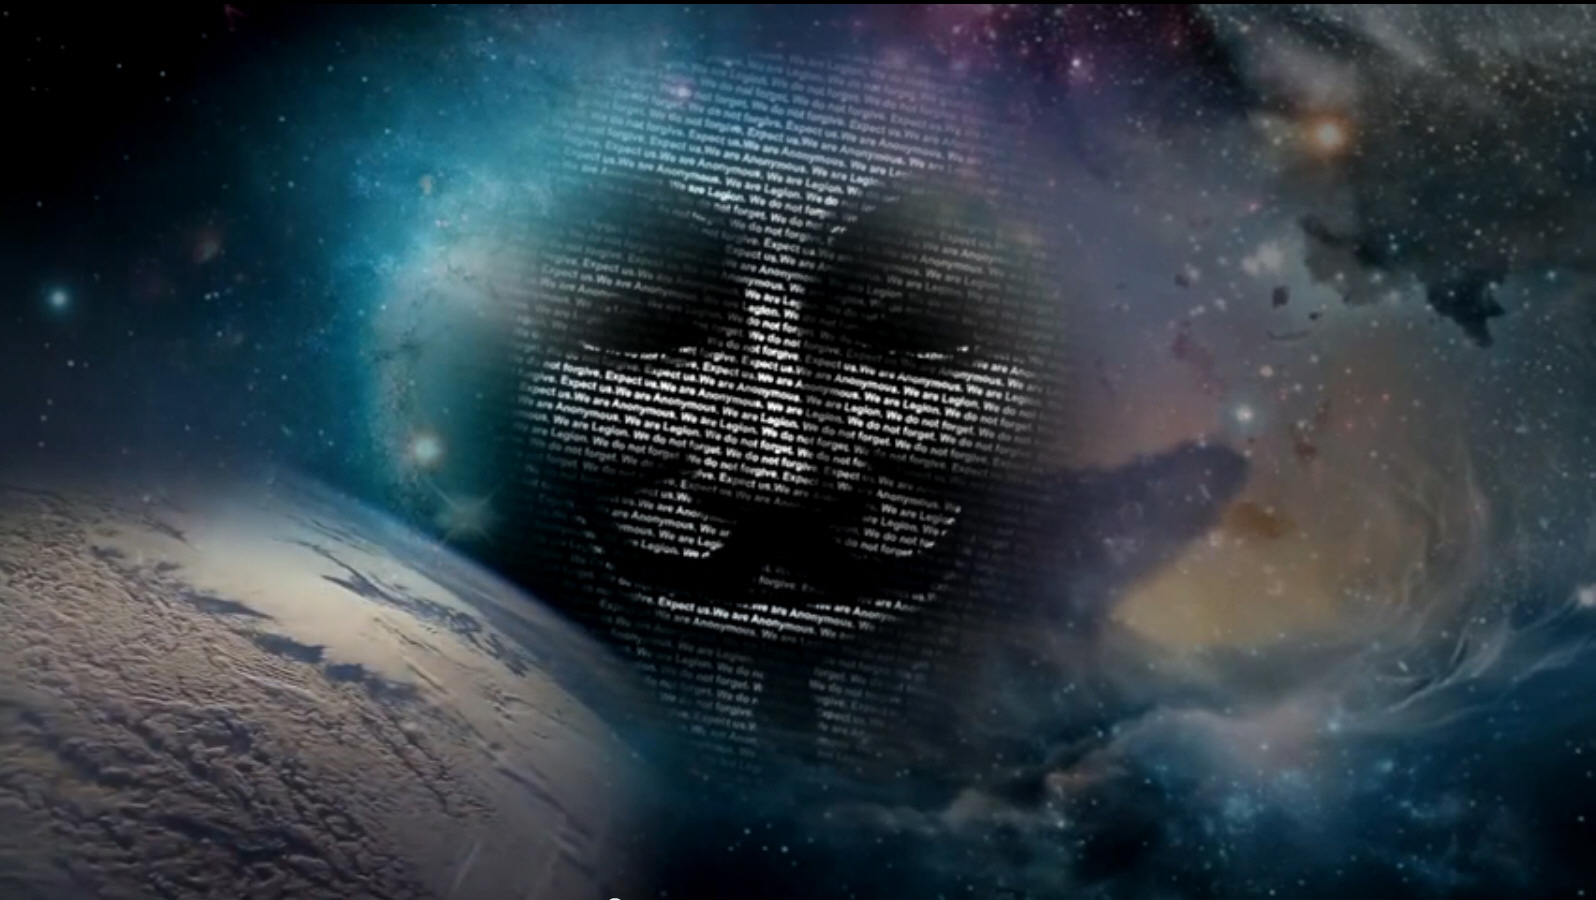 anonymous goes into space